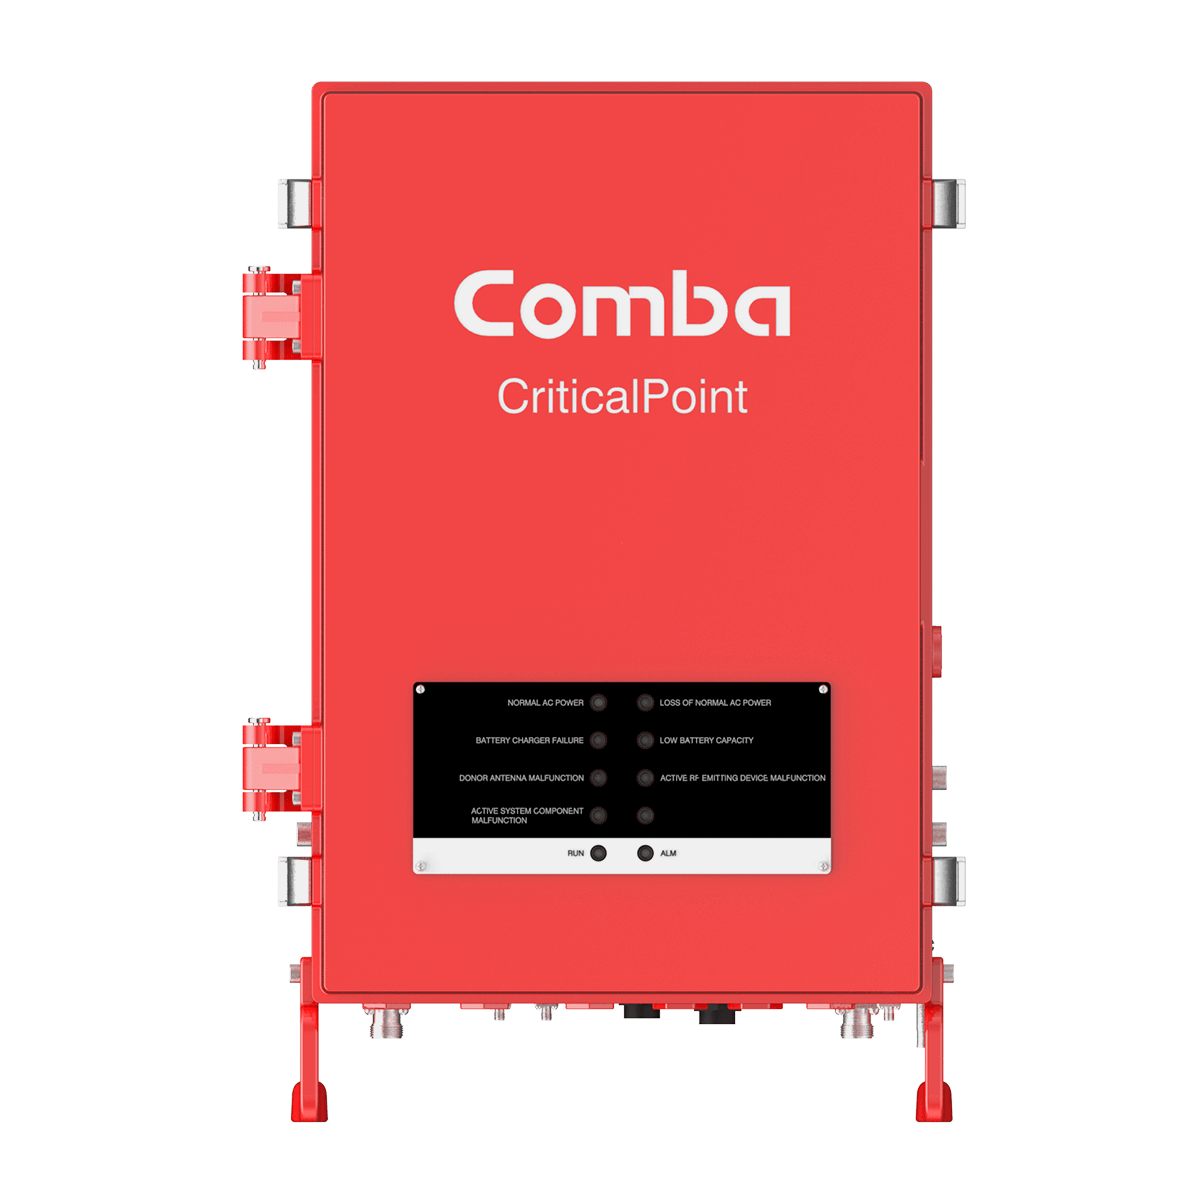 Original Image: Comba – Public Safety Critical Point NG 700MHz Single Band, Class A, 0.5W Remote Unit, S1 configuration, HCAI OSP listed